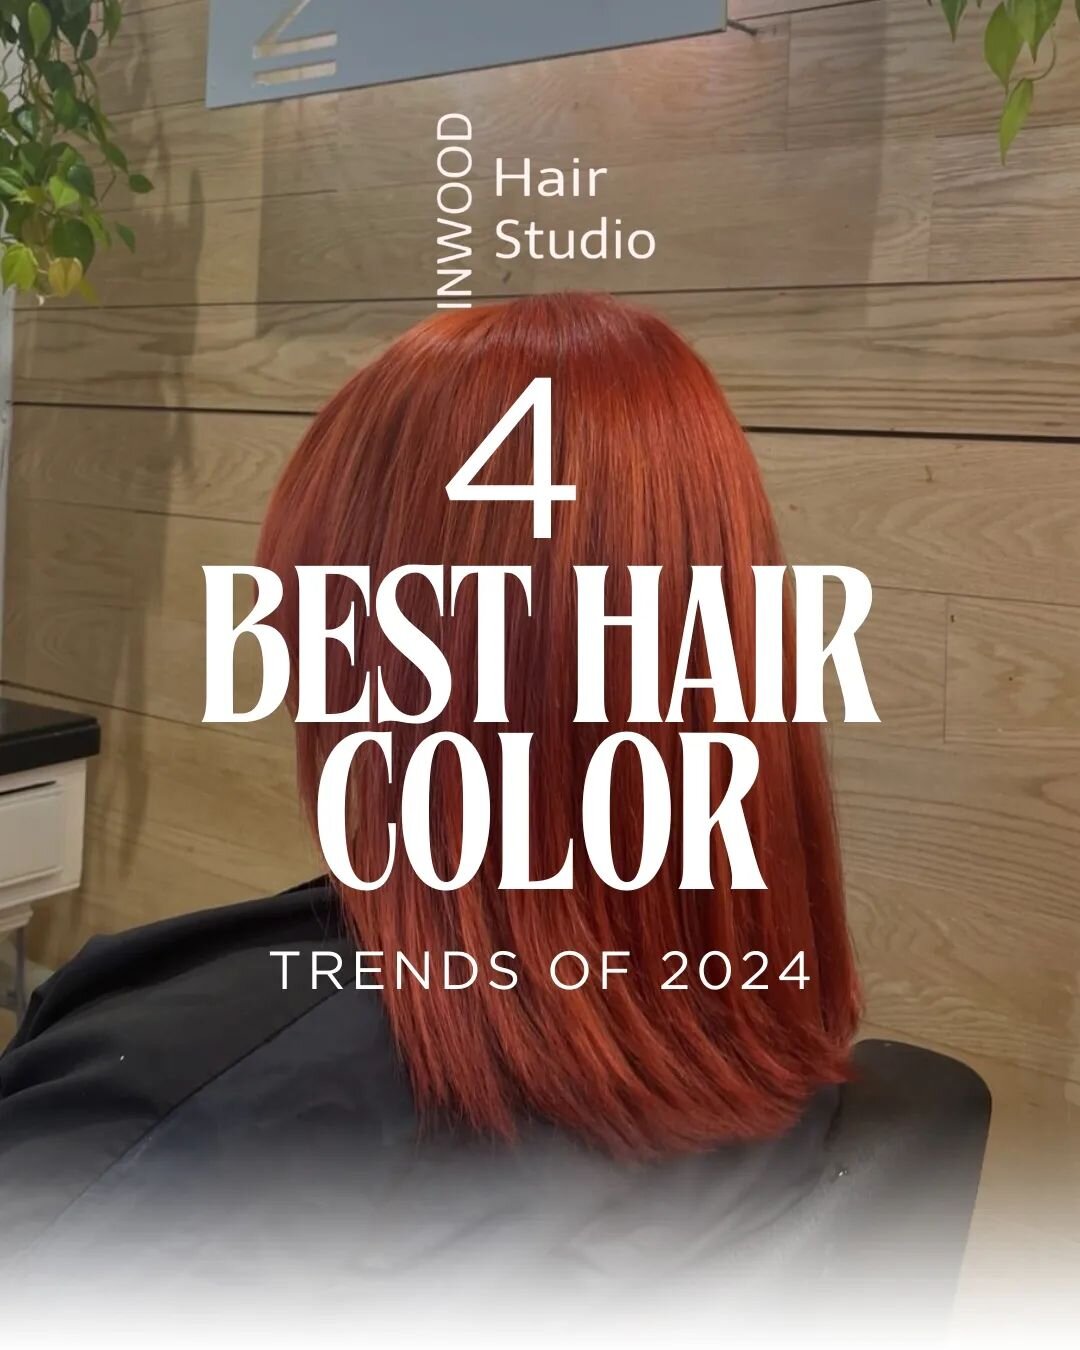 Discover the 4 viral hair colors in 2024. From vibrant tones to subtle shades, each one designed to enhance your unique beauty. Transform your look and add a fresh touch to your style. ✨

Descubre los 4 colores de cabello virales en el 2024. Desde to